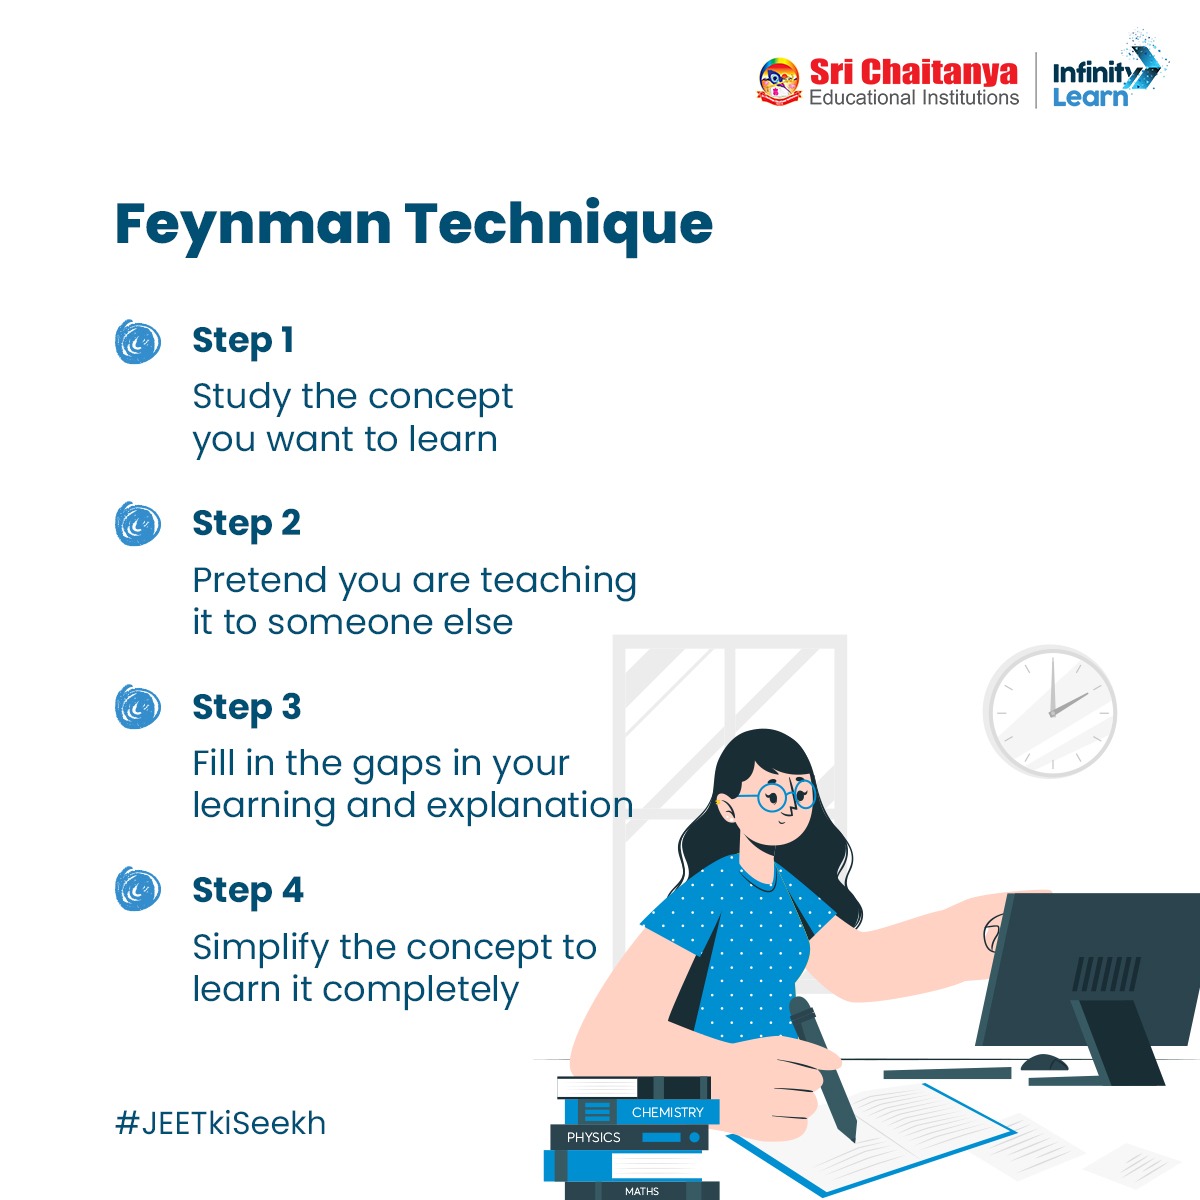 Understand complex concepts and ideas by breaking them down into simple, easy-to-understand language with the #FeynmanTechnique of learning and ace #JEE.​

#EffectiveStudyingTechniques #LearningMethods #JEEMain #JEETkiSeekh #JEEMain2022 #SriChaitanya